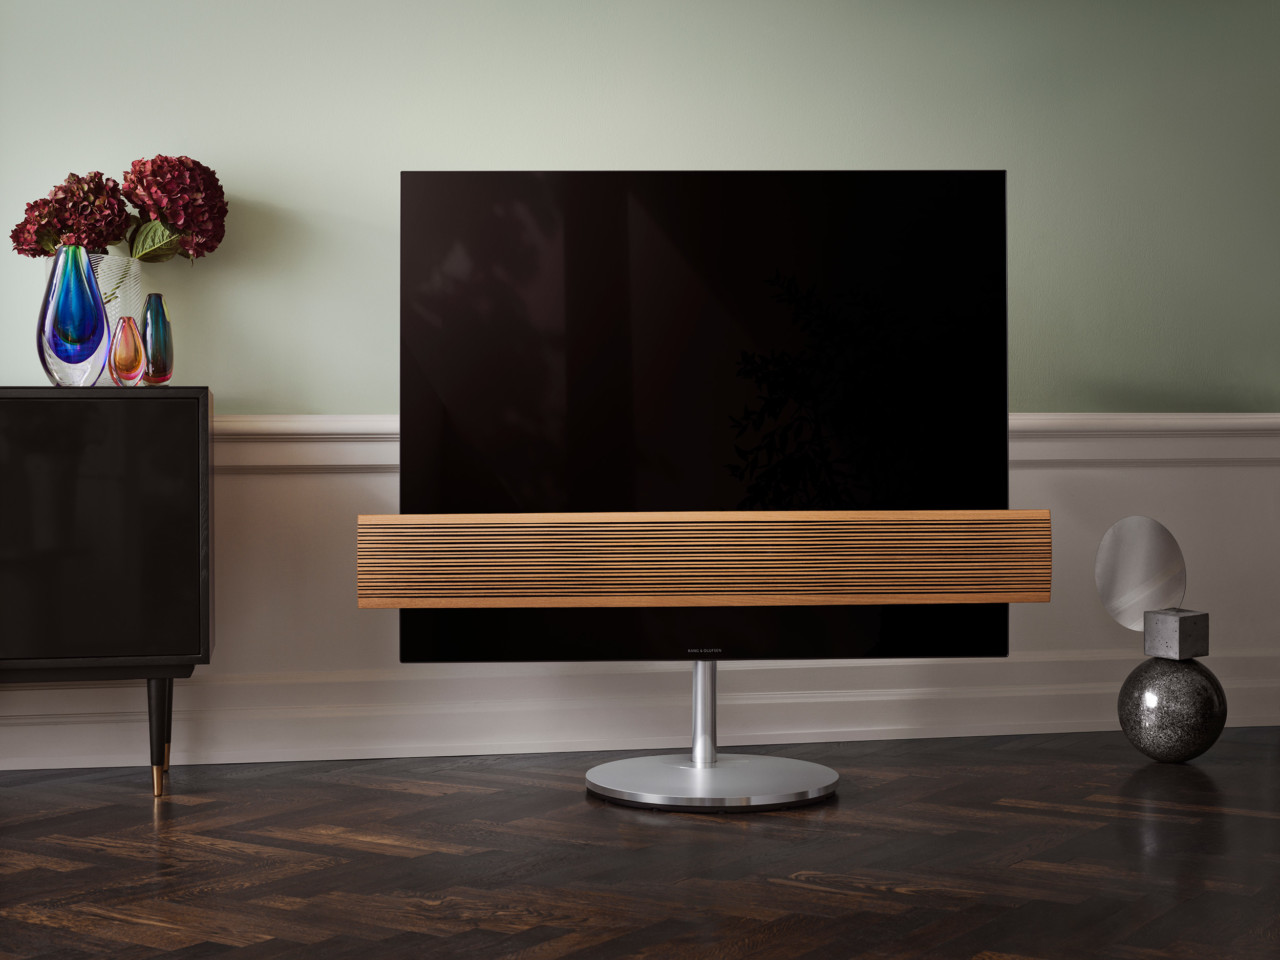 Warm Reception: B&O Updates the BeoVision Eclipse With Wood